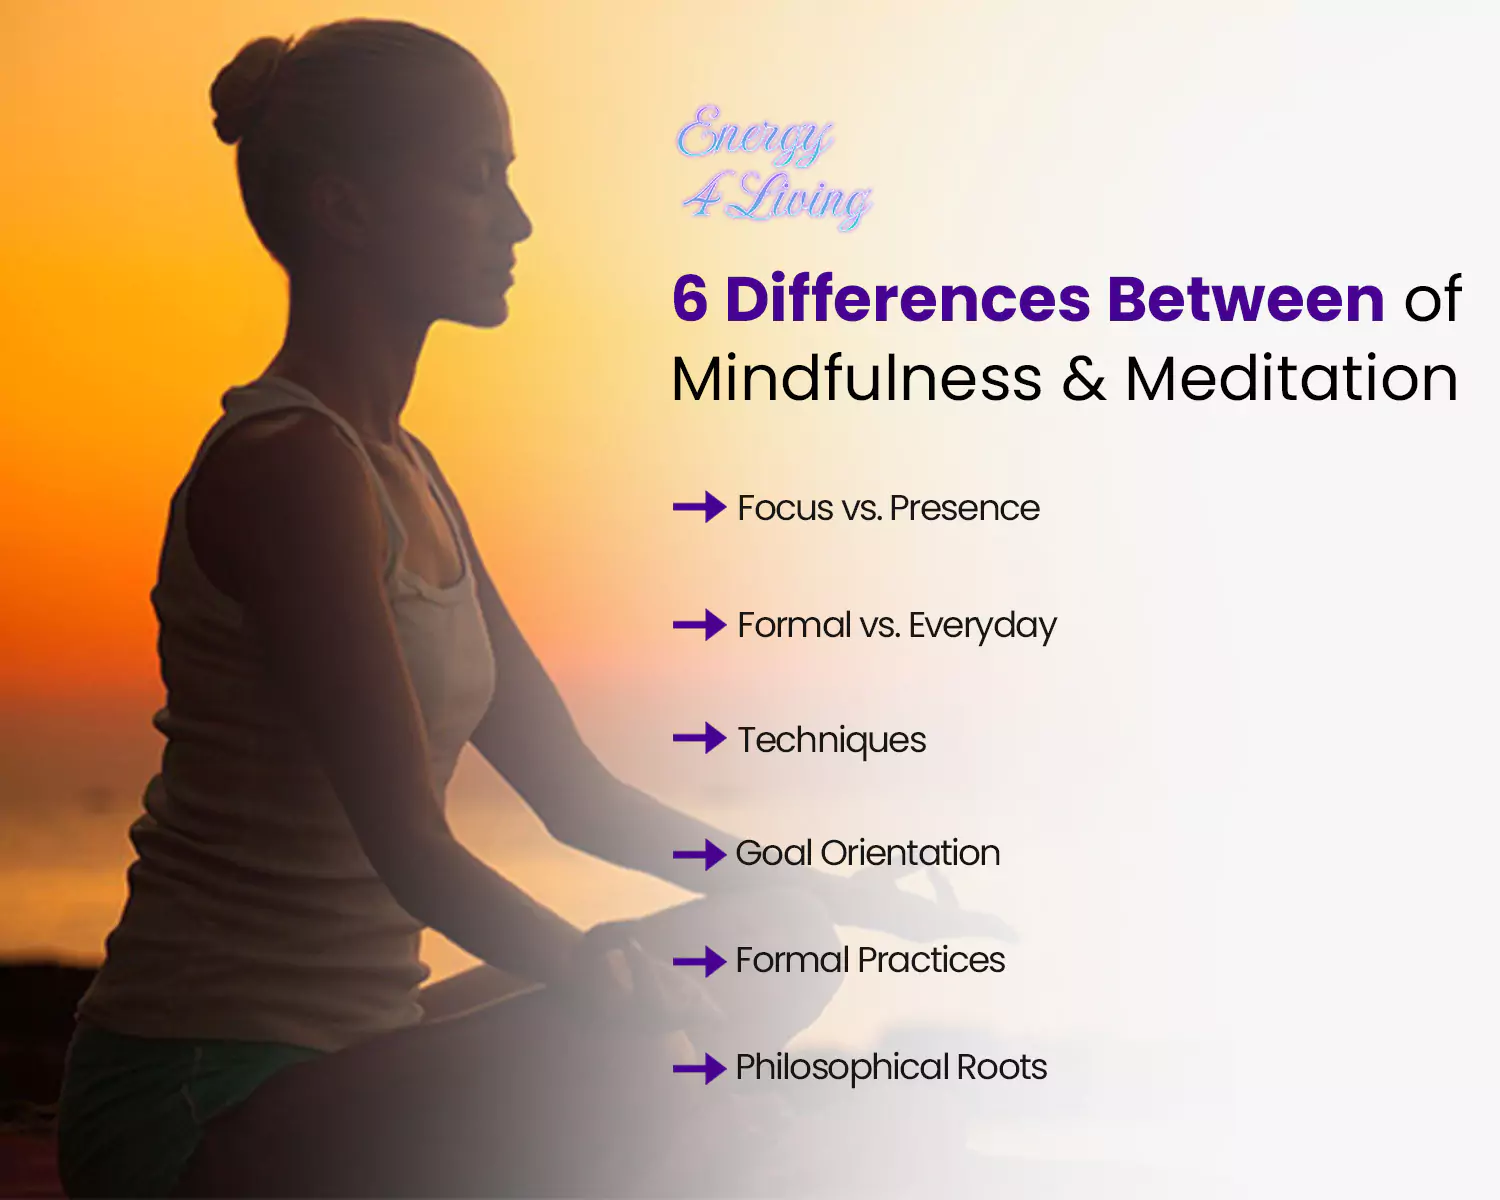 6 Differences Between Mindfulness and Meditation